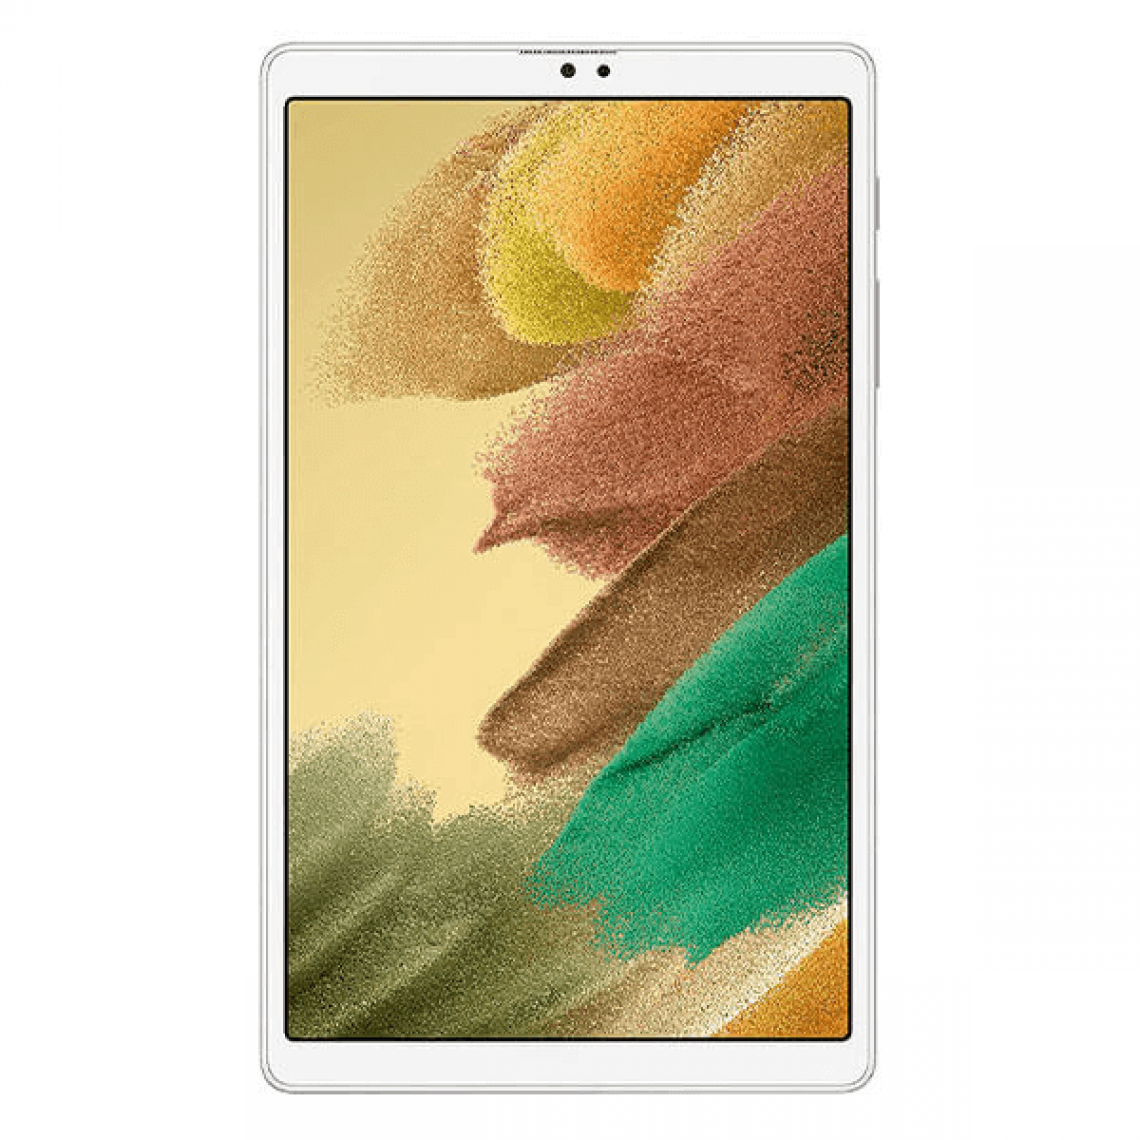 Samsung - Samsung Galaxy Tab A7 Lite 4G 3Go / 32Go Argent (Argent) SM-T225 - Tablette Android